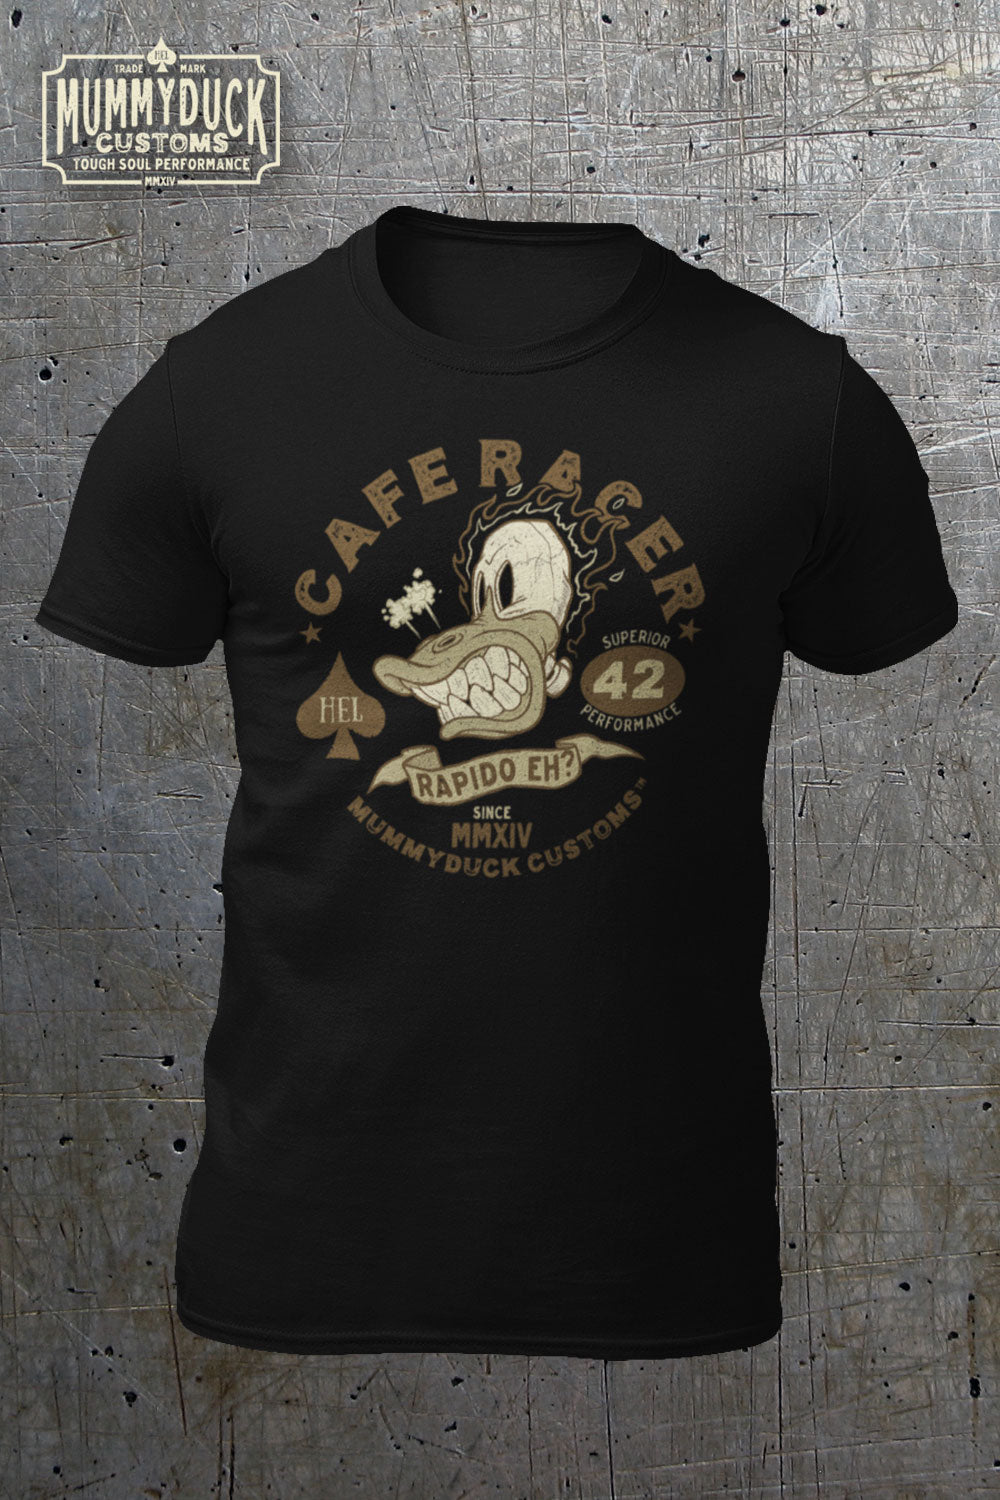 Black cafe racer motorcycle t-shirt with illustration